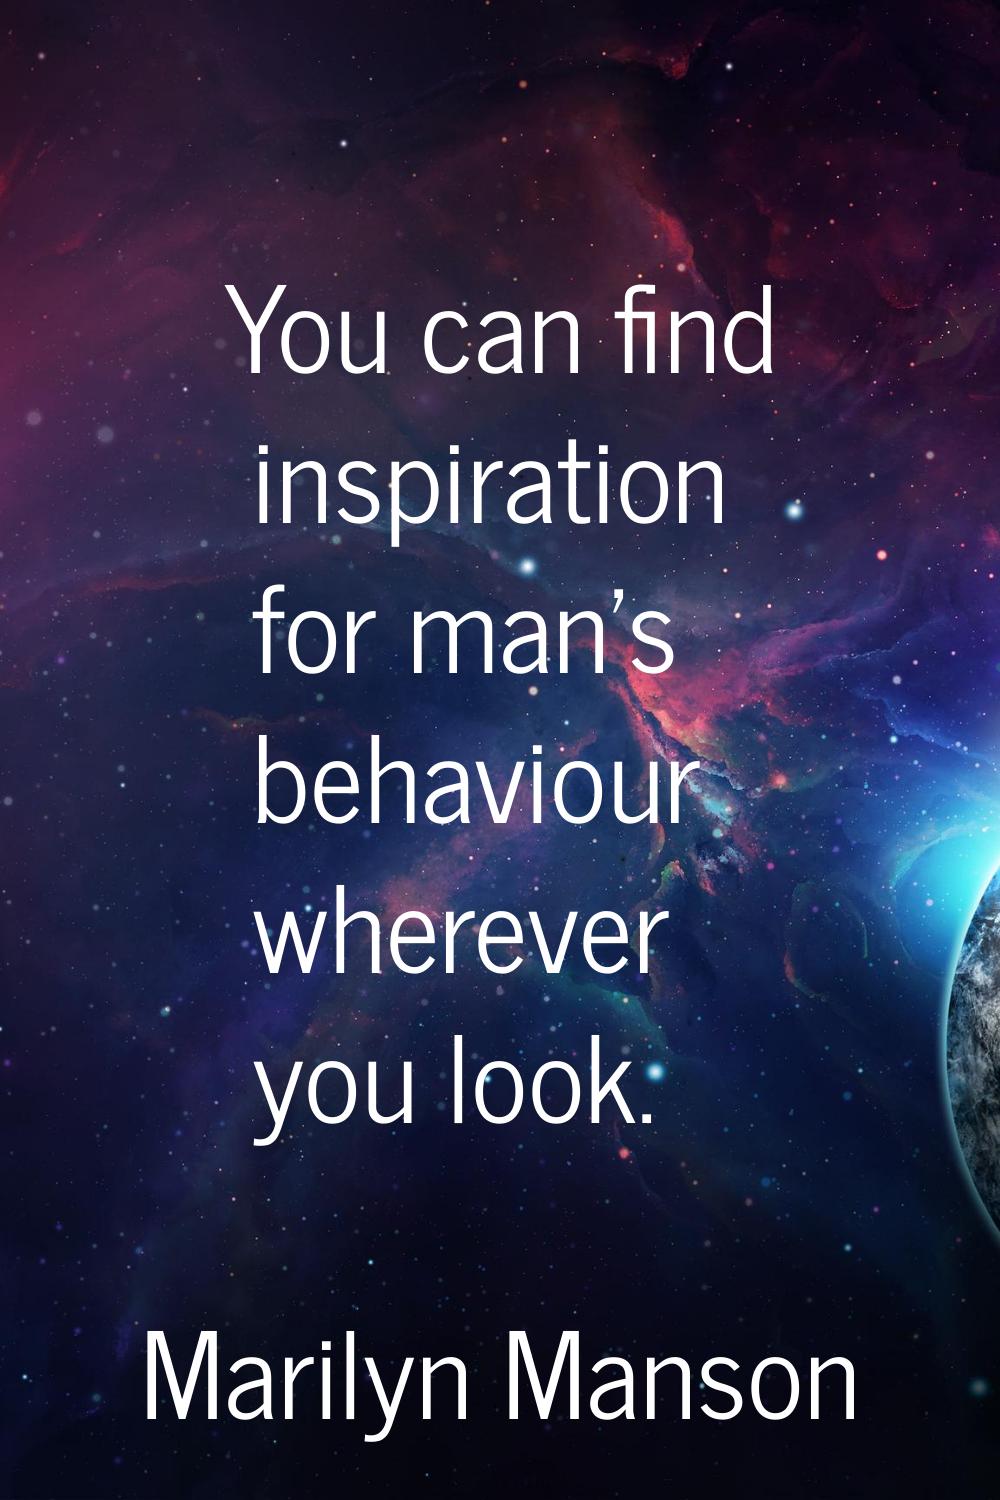 You can find inspiration for man's behaviour wherever you look.